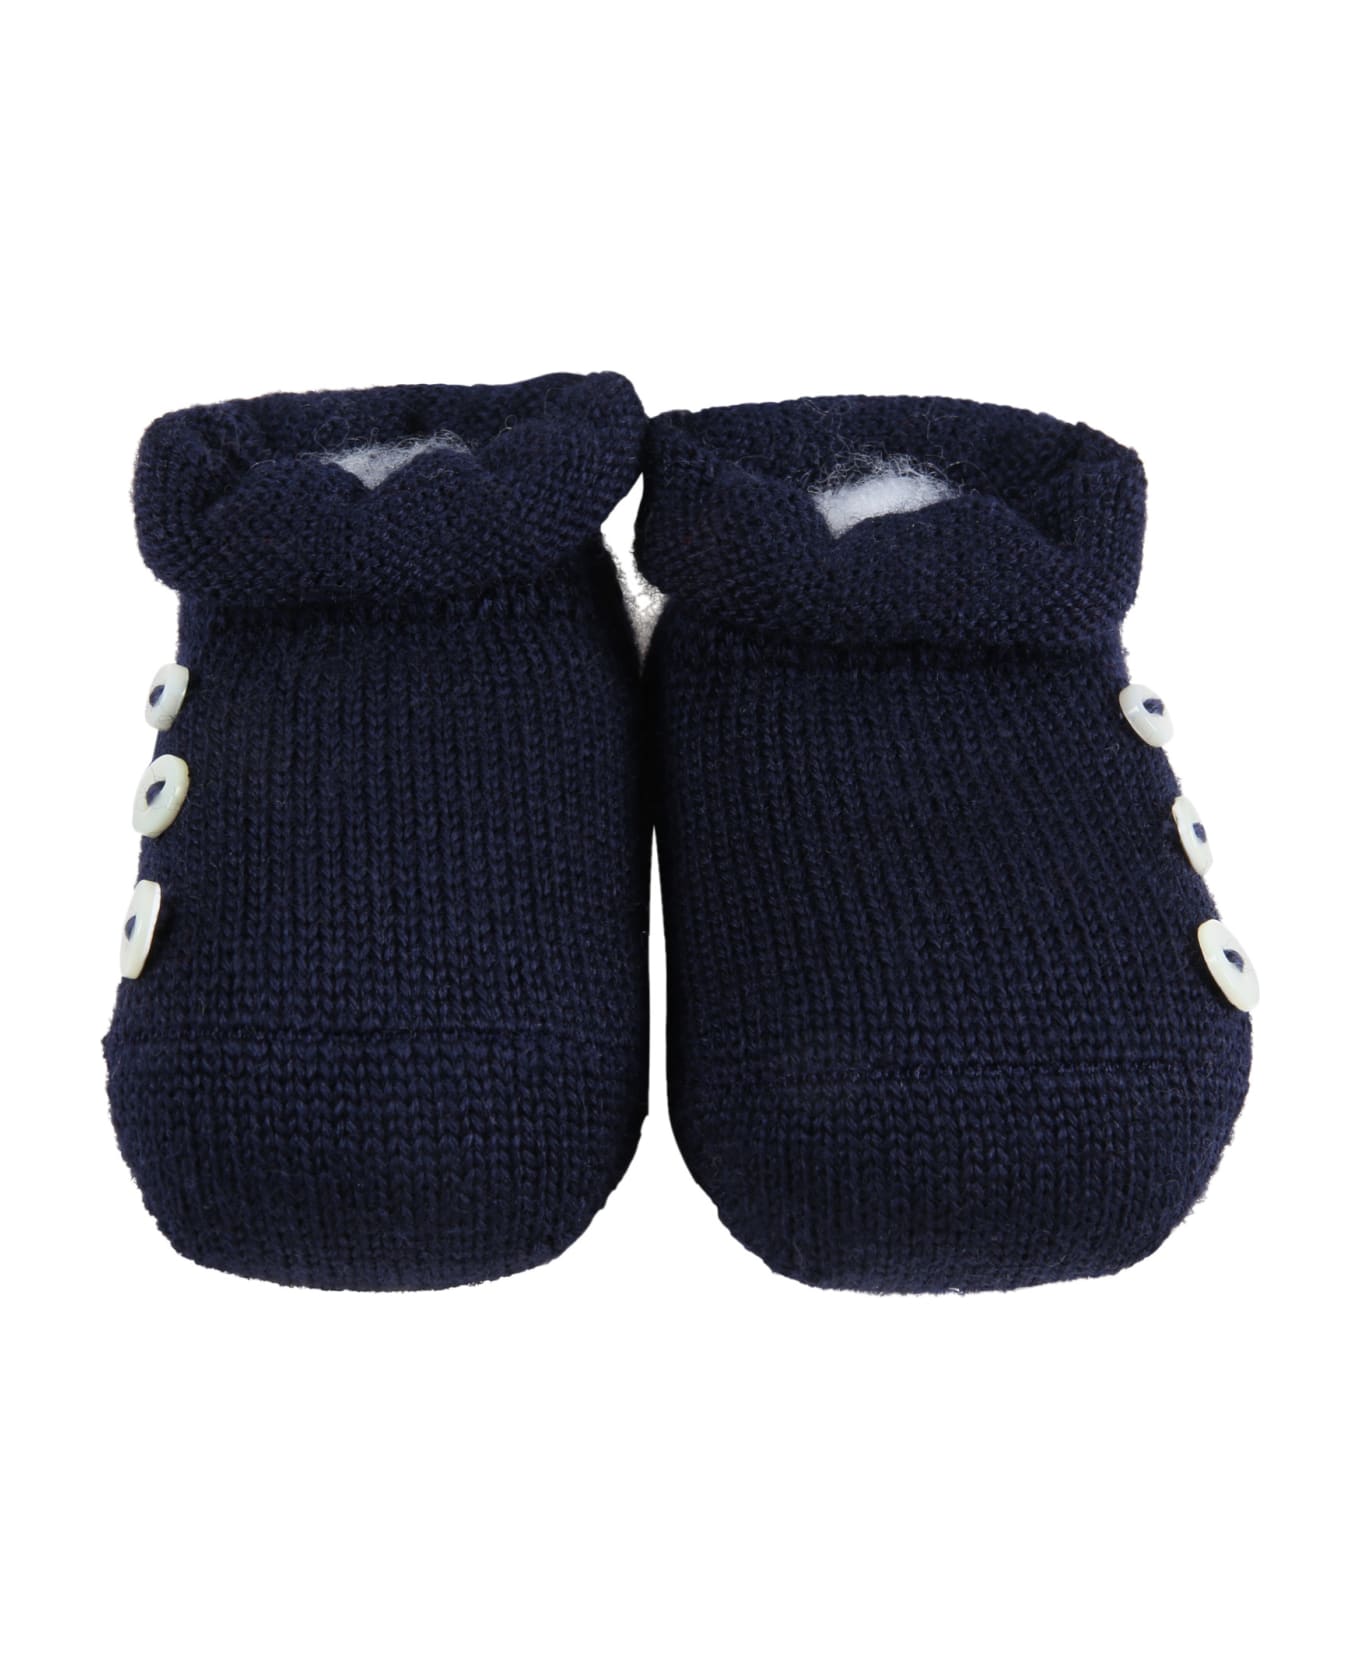 Story Loris Blue Baby-bootee For Babies - Blue アクセサリー＆ギフト